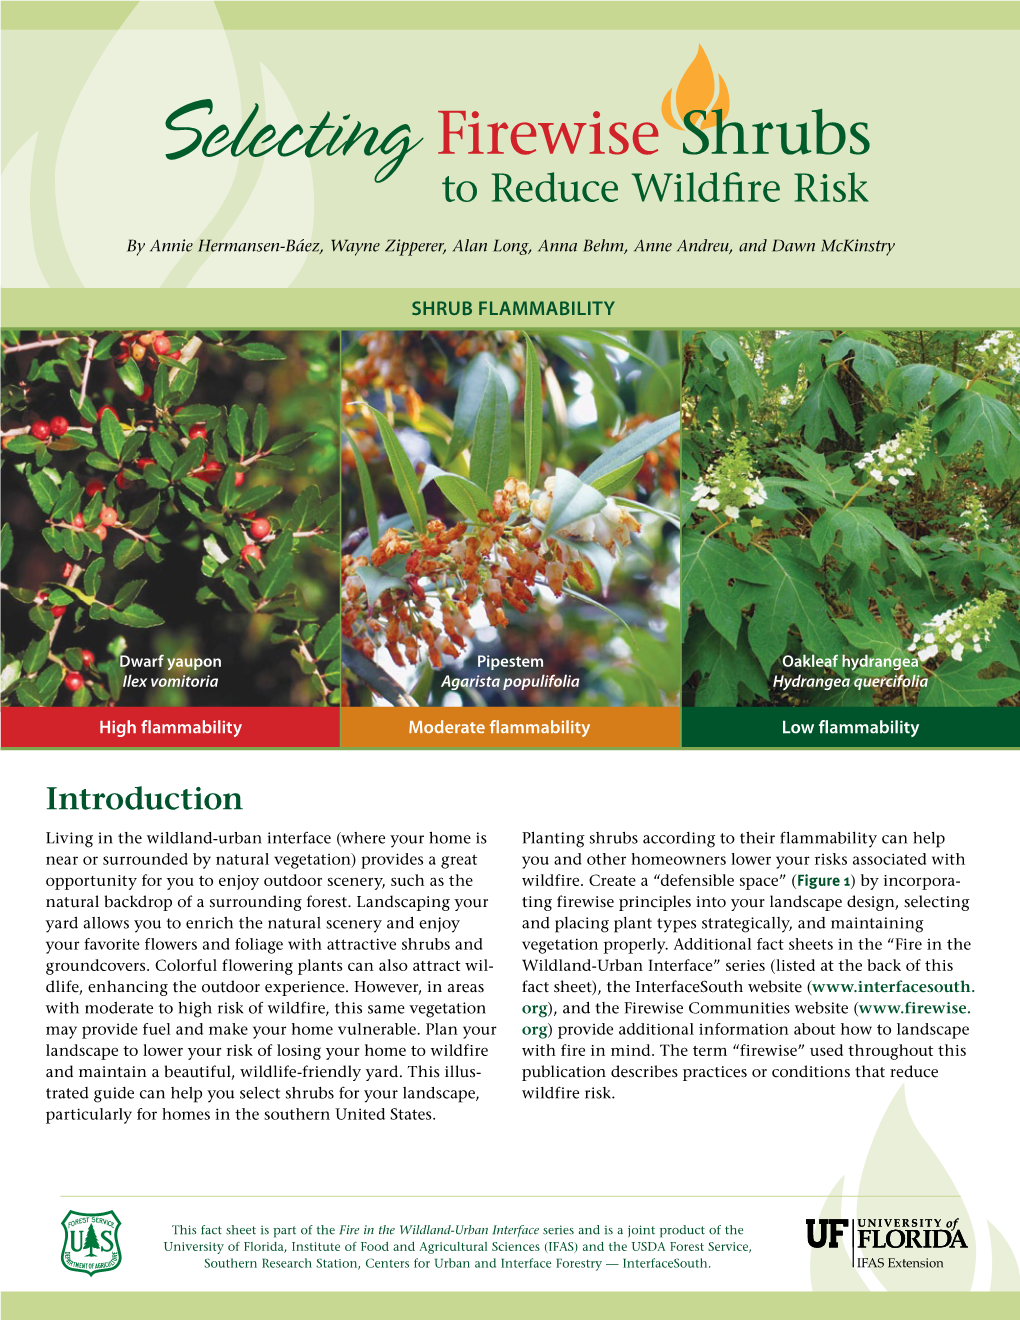 Selecting Firewise Shrubs to Reduce Wildfire Risk